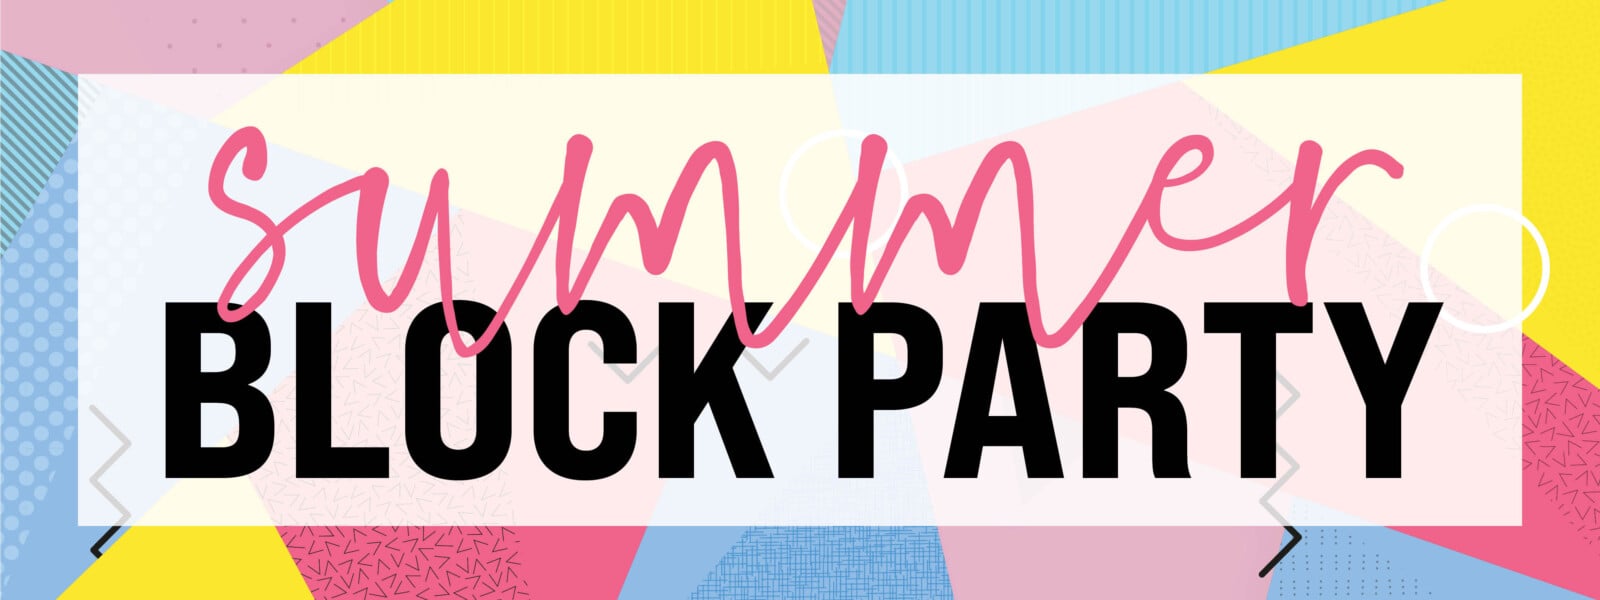 Pink, yellow, and blue graphic with "Summer Block Party" in text